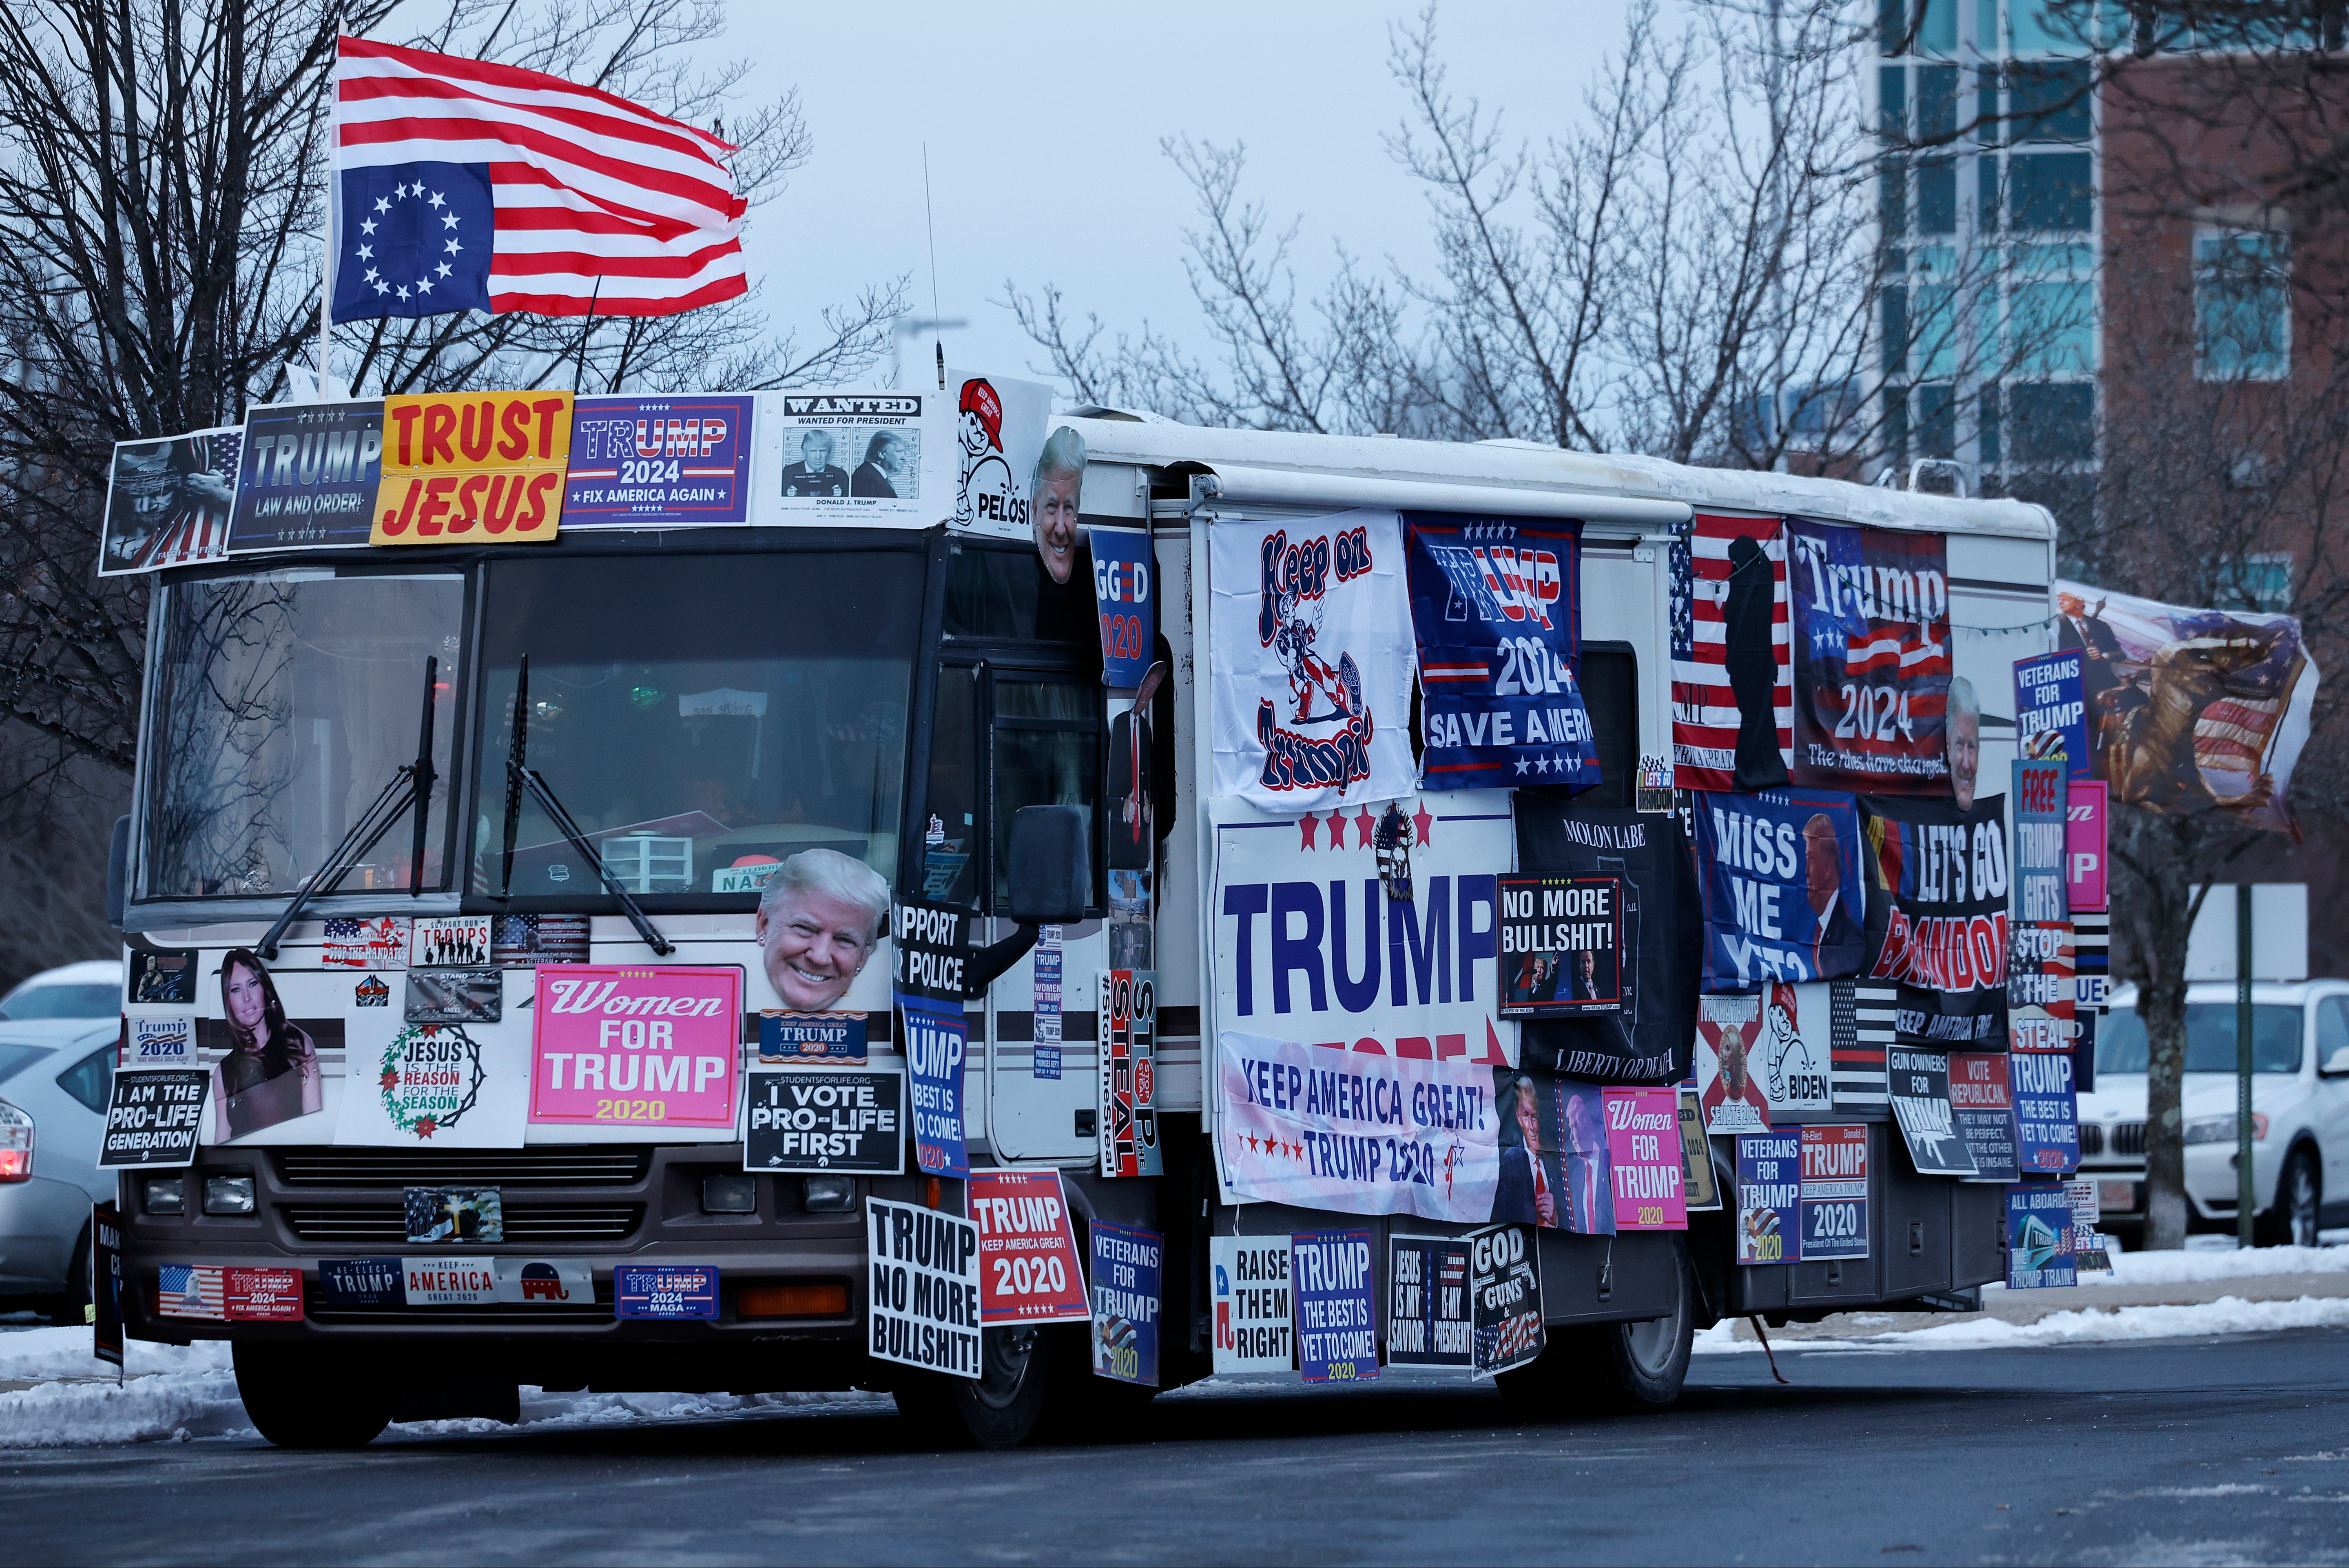 The RV covered in campaign signs and flags has been spotted outside other Donald Trump campaign rallies, such as in Concord, New Hampshire on 19 January